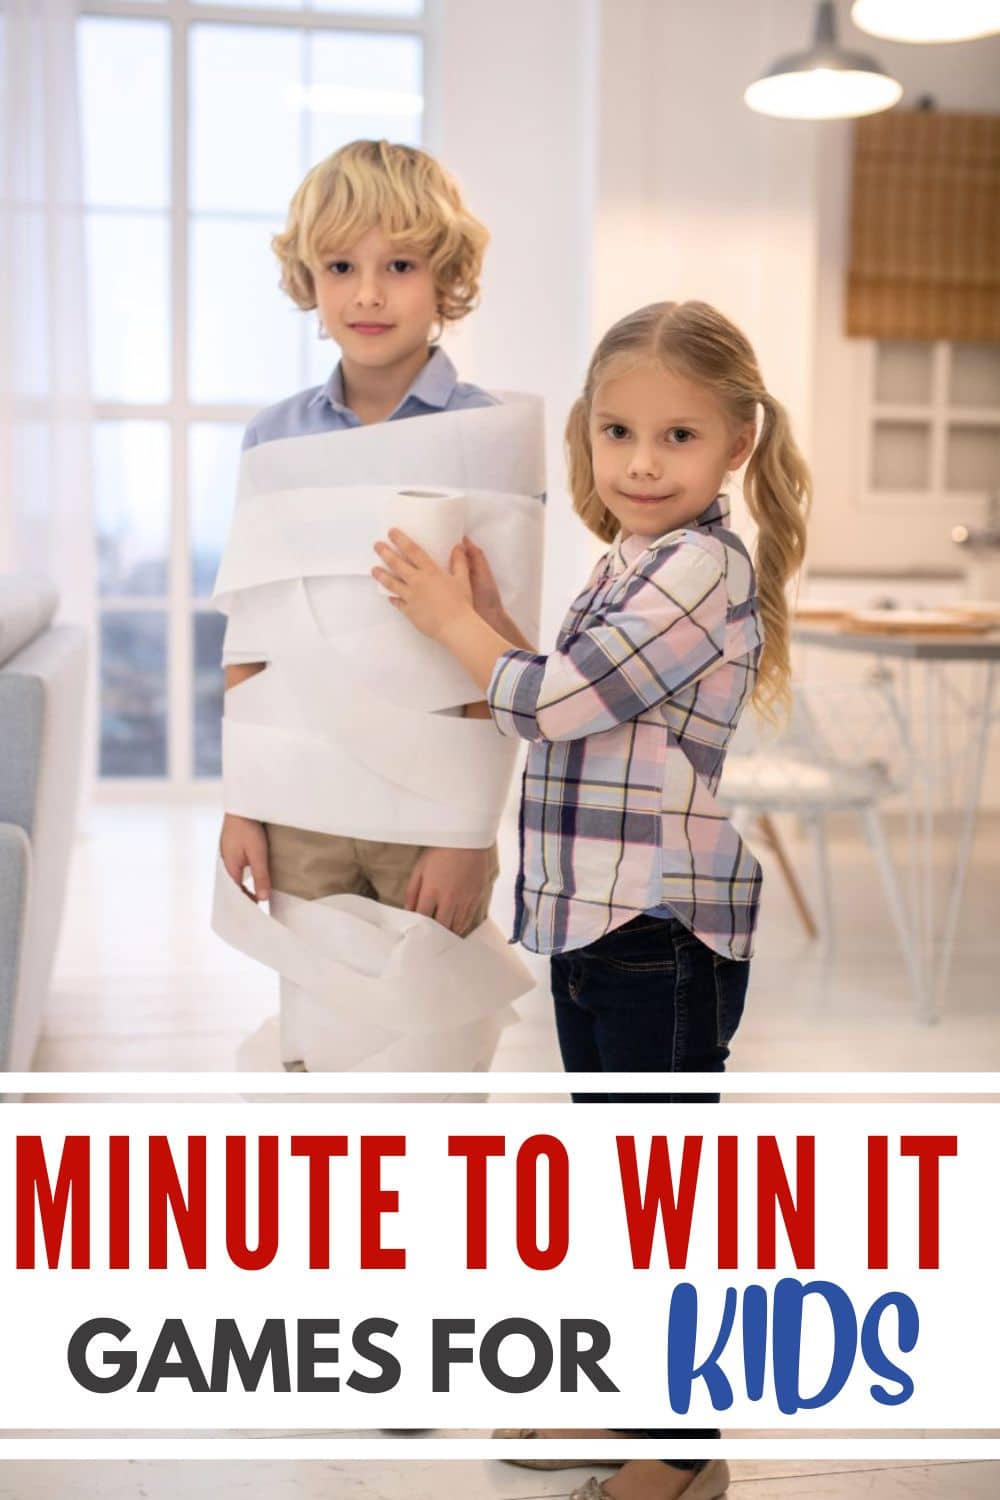 Two children with toilet paper wrapped around like mummy with text "Minute to win it games for Kids."